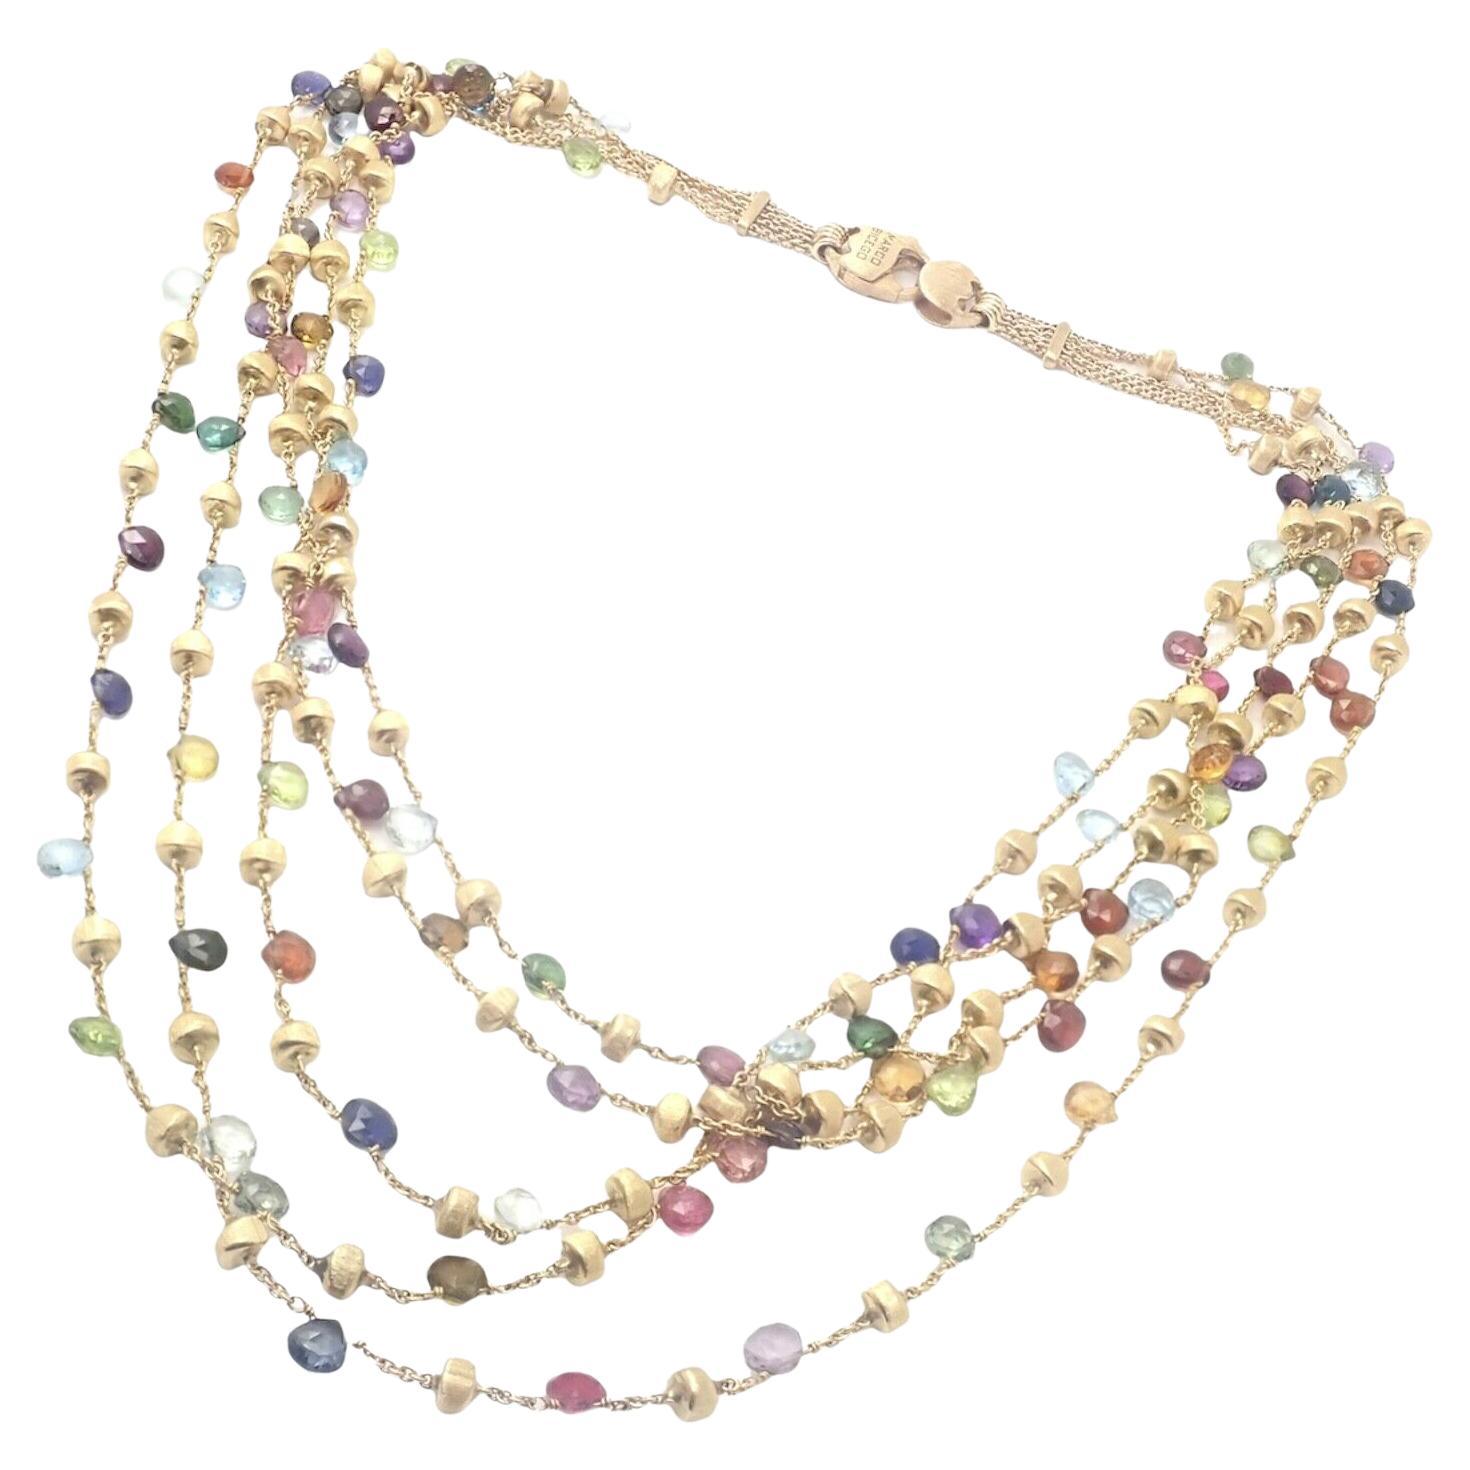 Marco Bicego Paradise 5 Row Multicolor Gemstone Yellow Gold Necklace